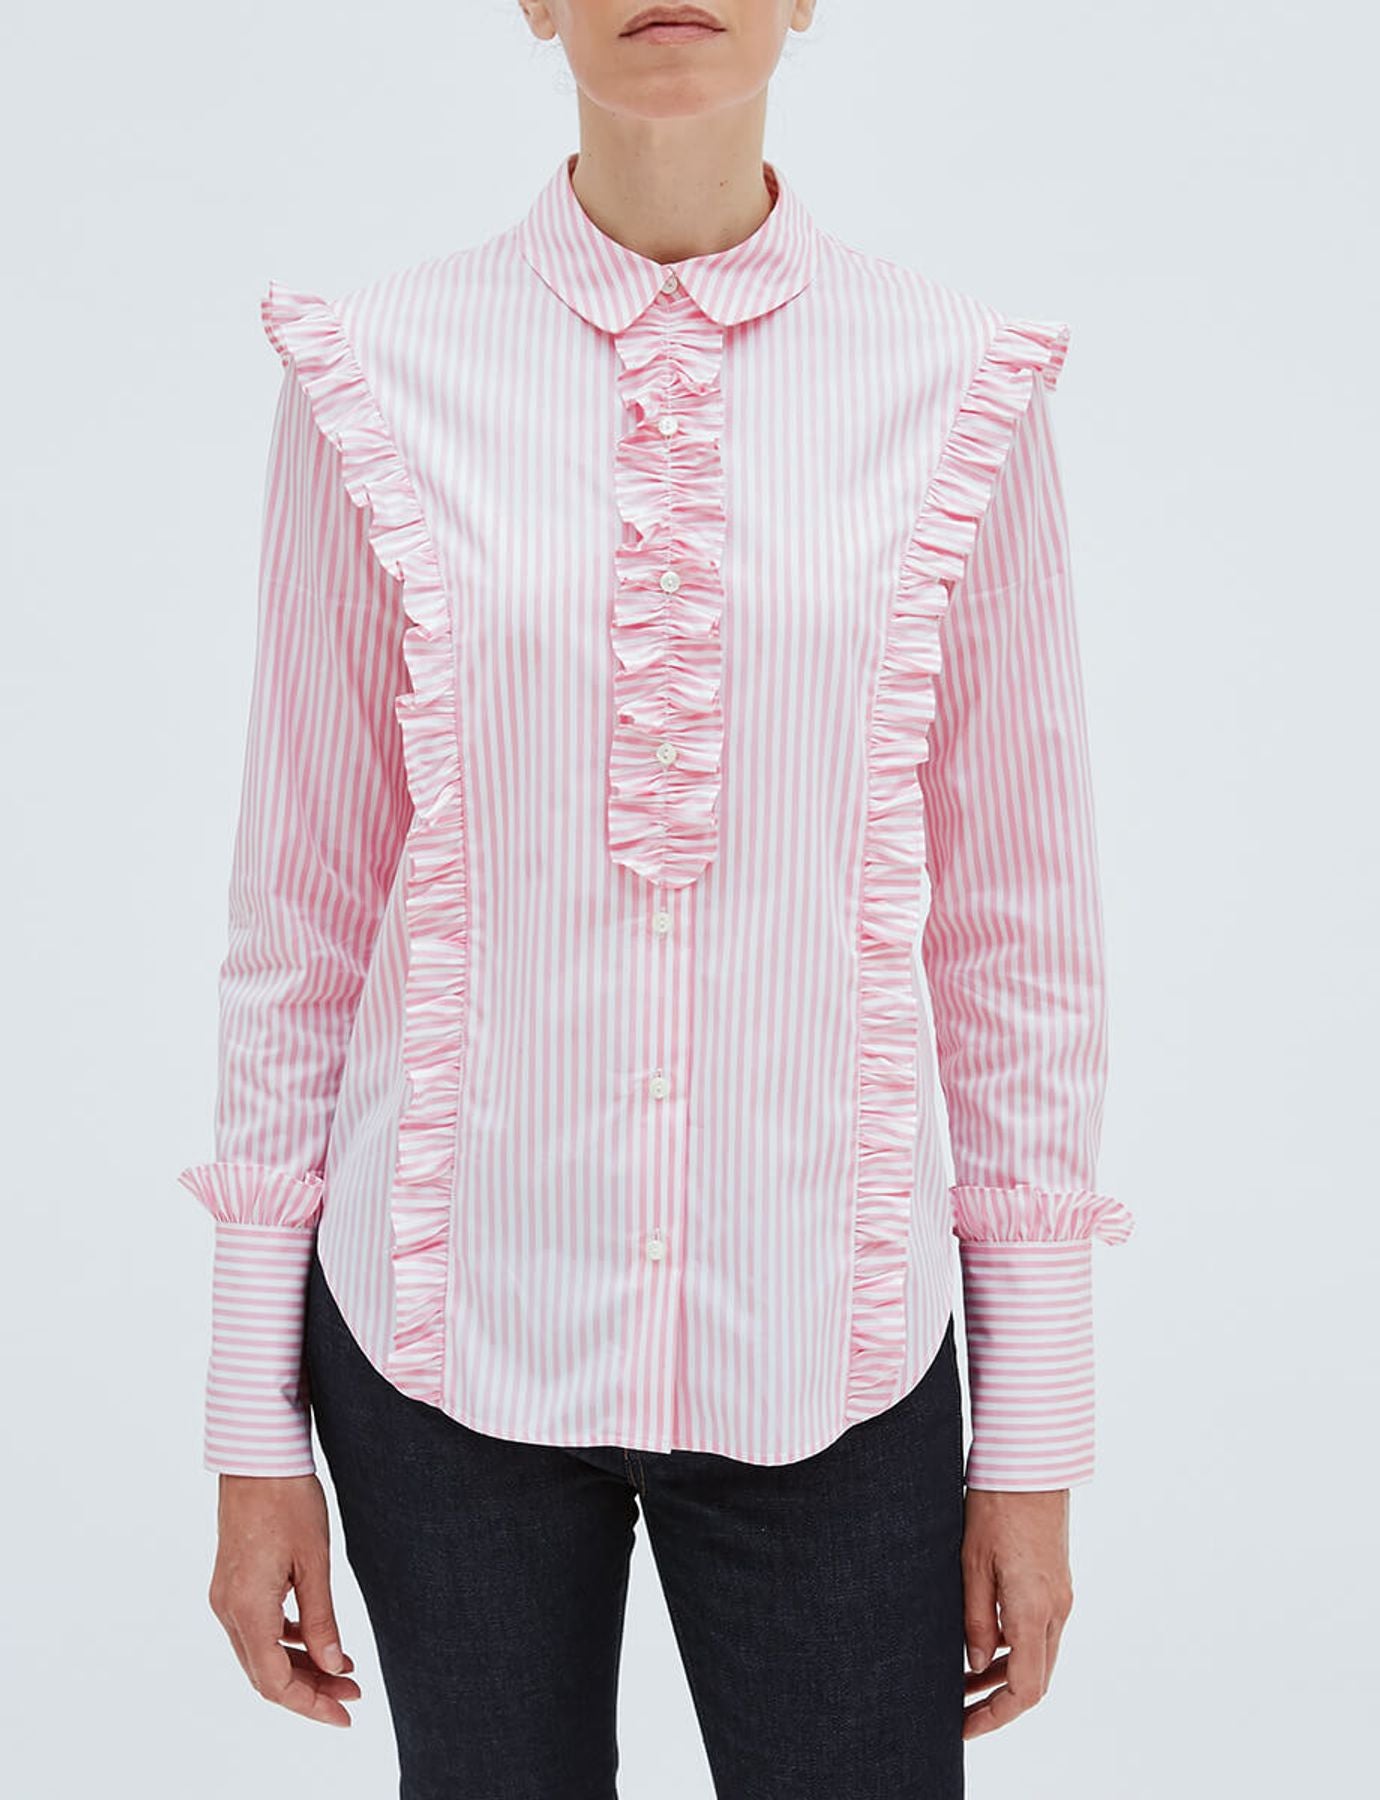 lucina-in-cotton-pale pink shirt